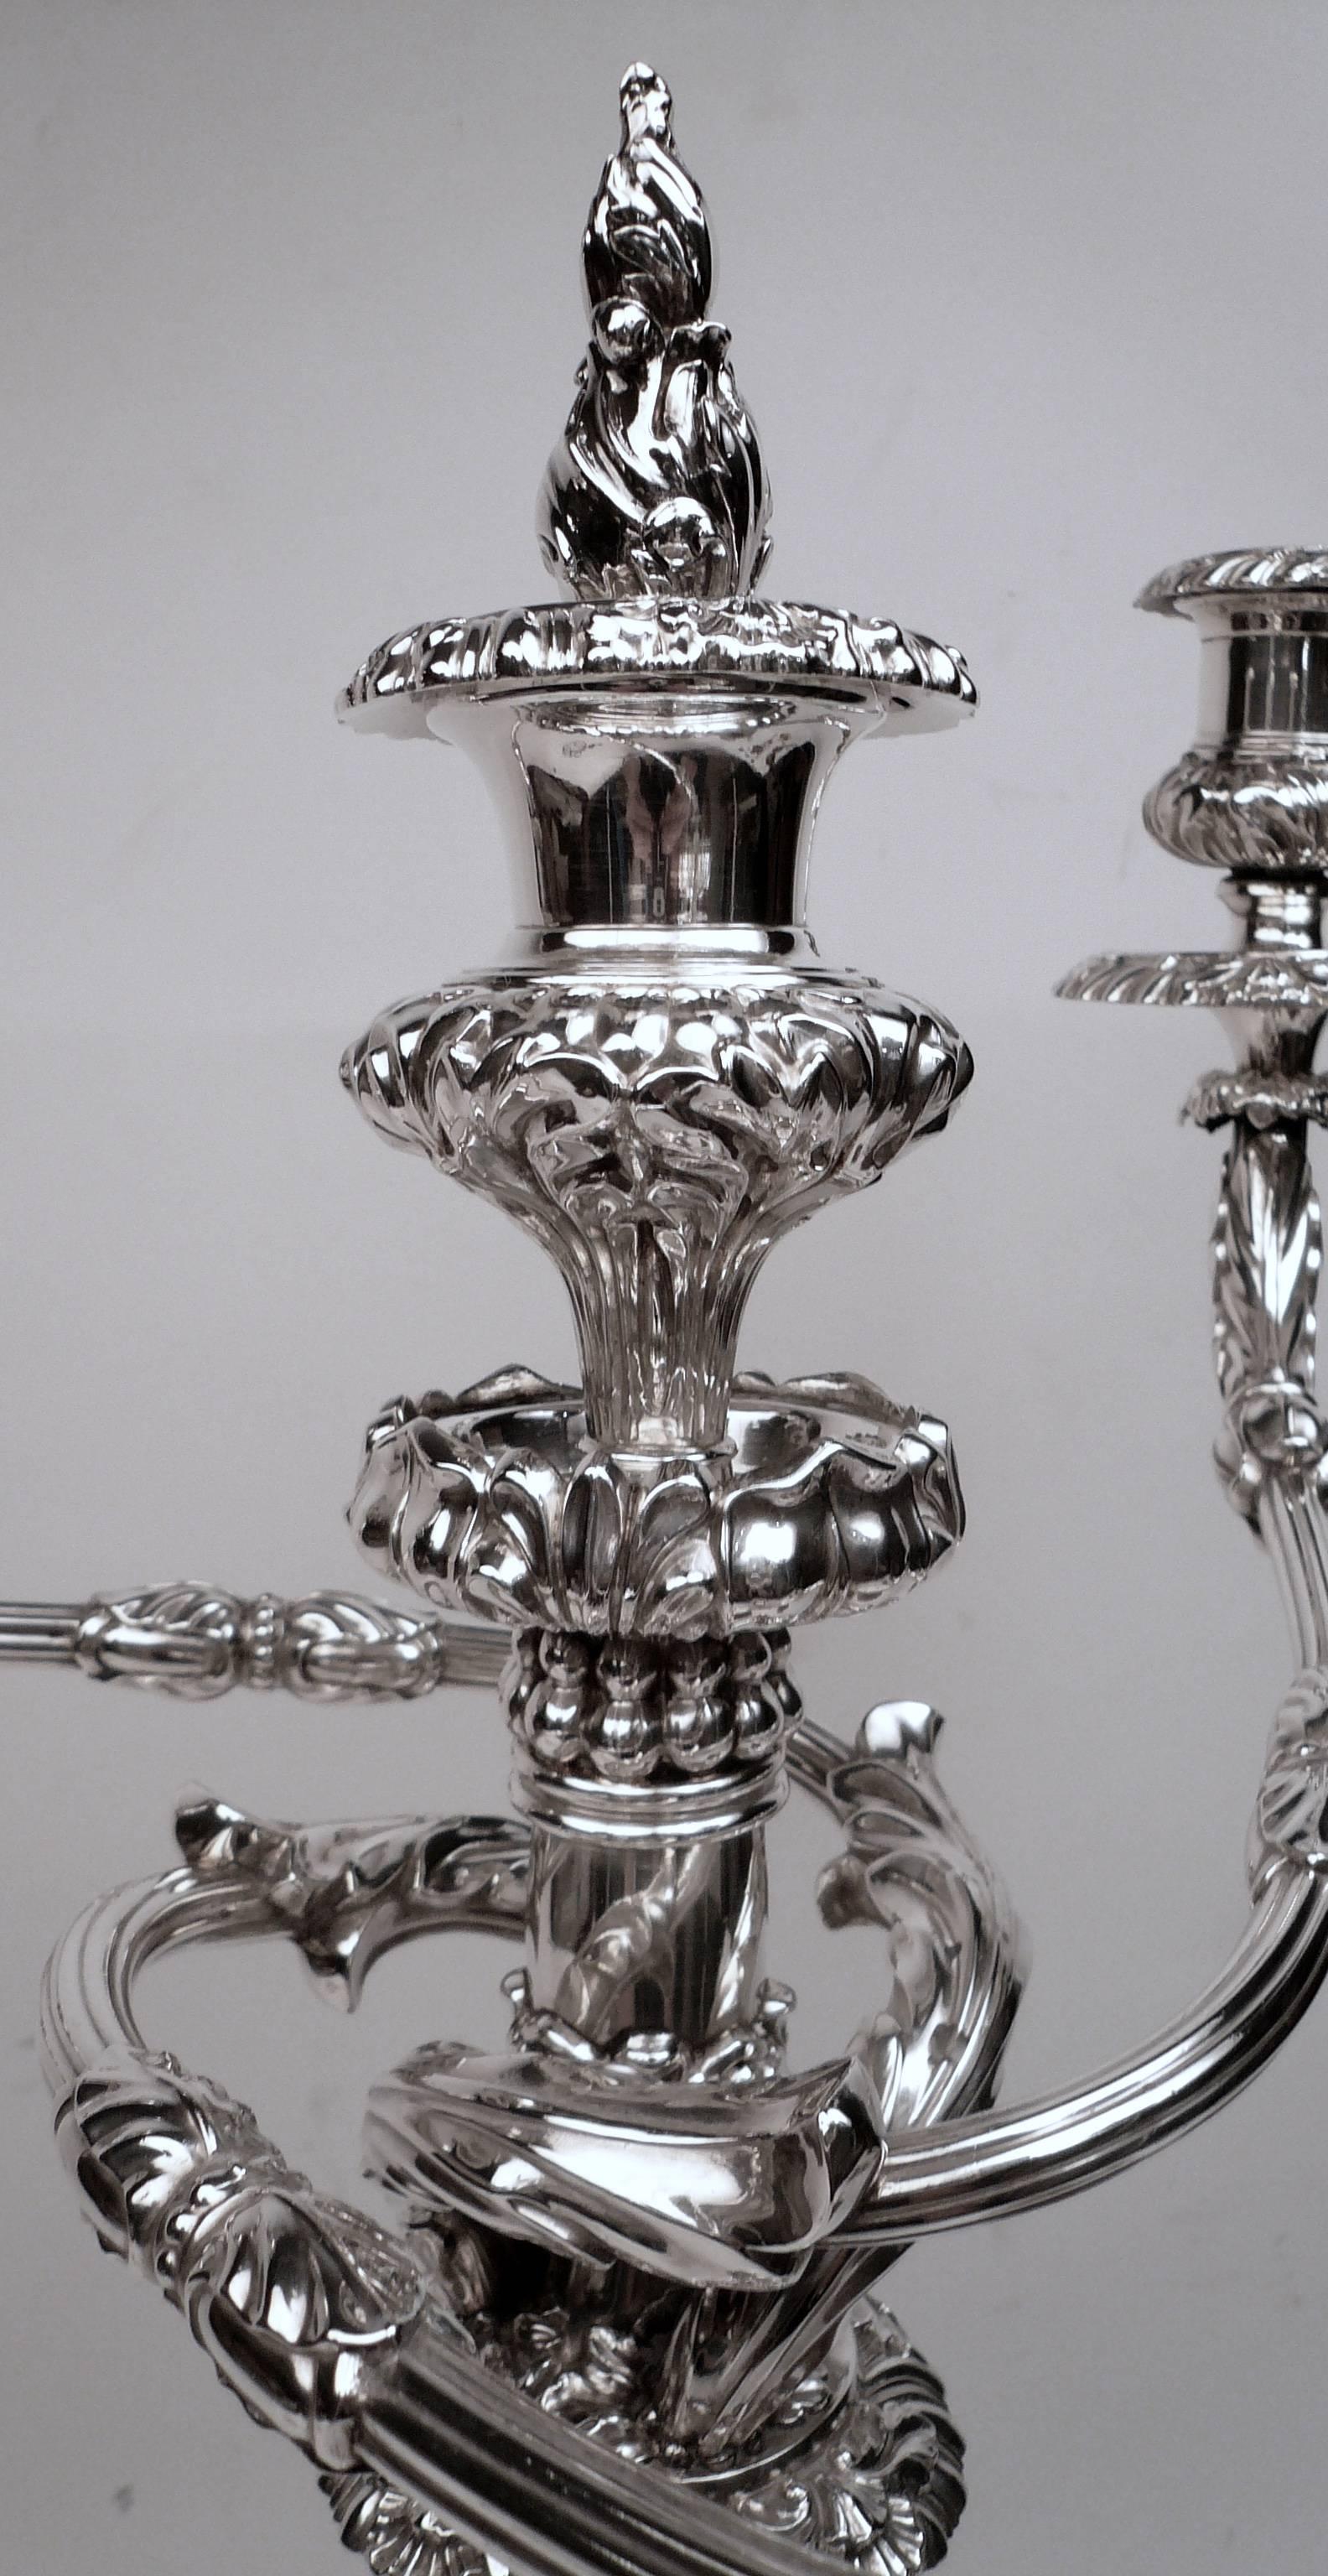 19th Century Important Pair of English Regency Sterling Silver Candelabra by Matthew Boulton